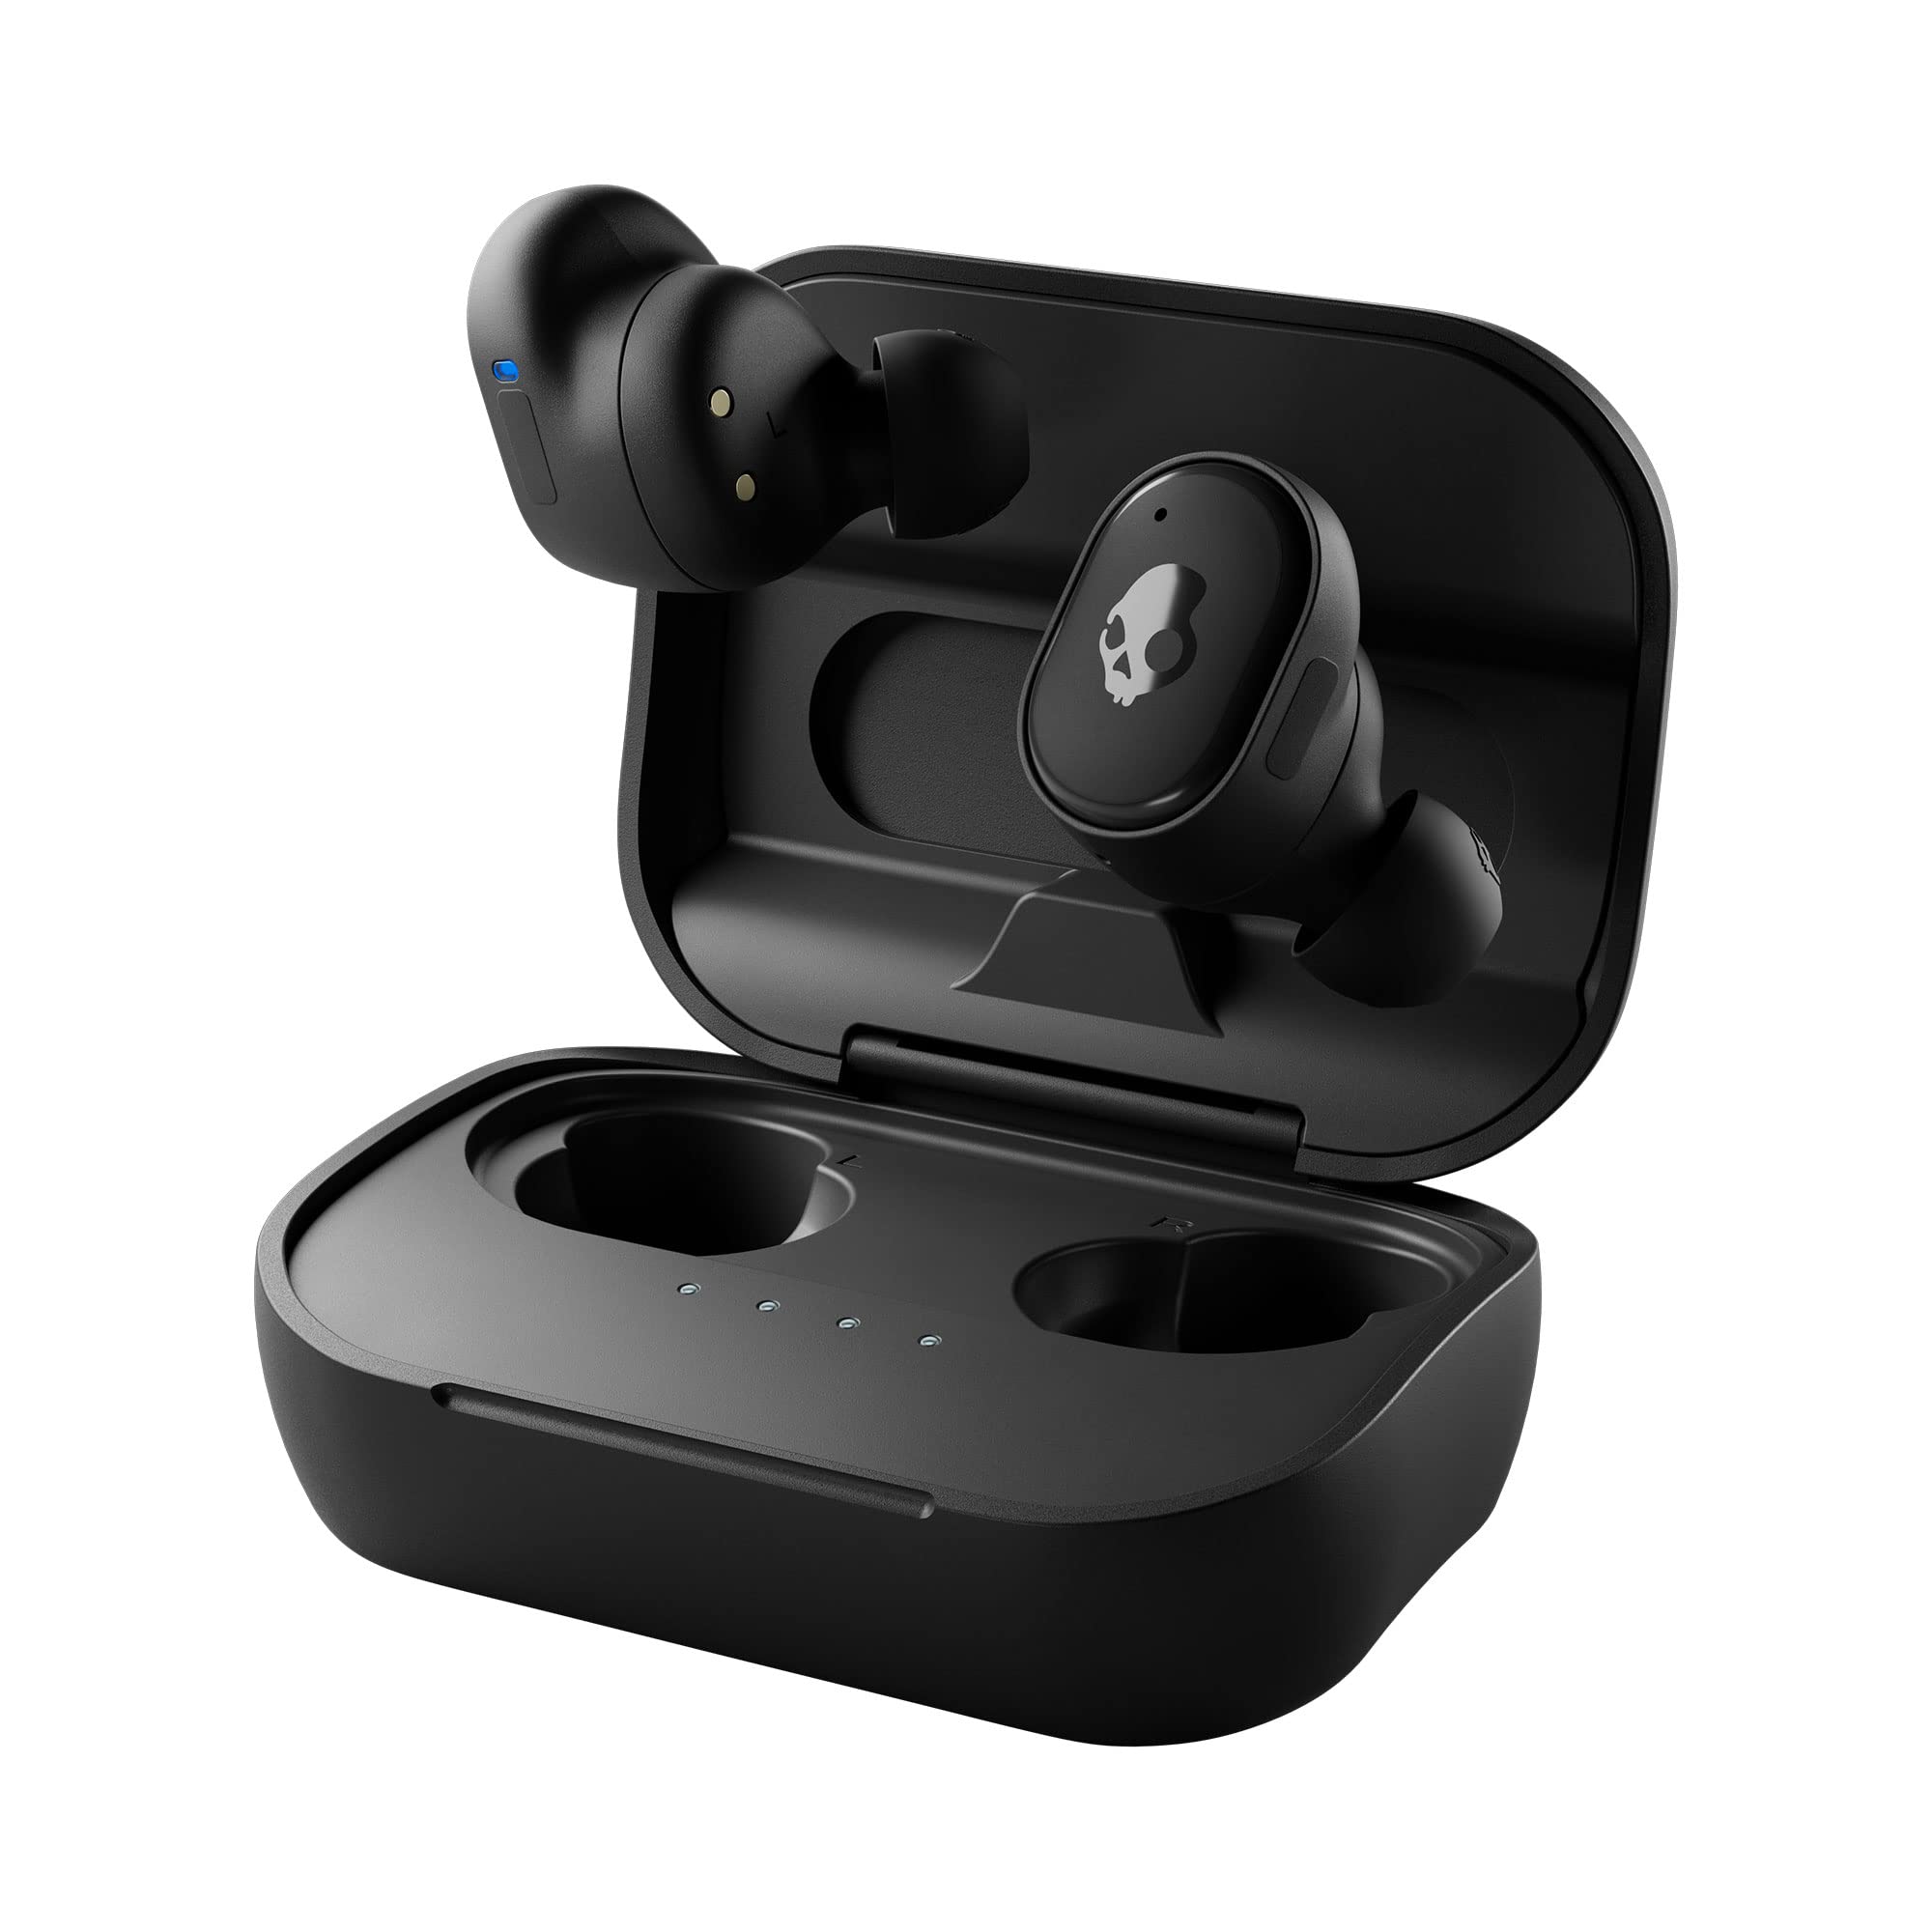 Skullcandy Grind True Wireless In-Ear Bluetooth Earbuds Compatible with iPhone and Android / Charging Case and Microphone / Great for Gym, Sports, and Gaming, IP55 Water Dust Resistant - Black